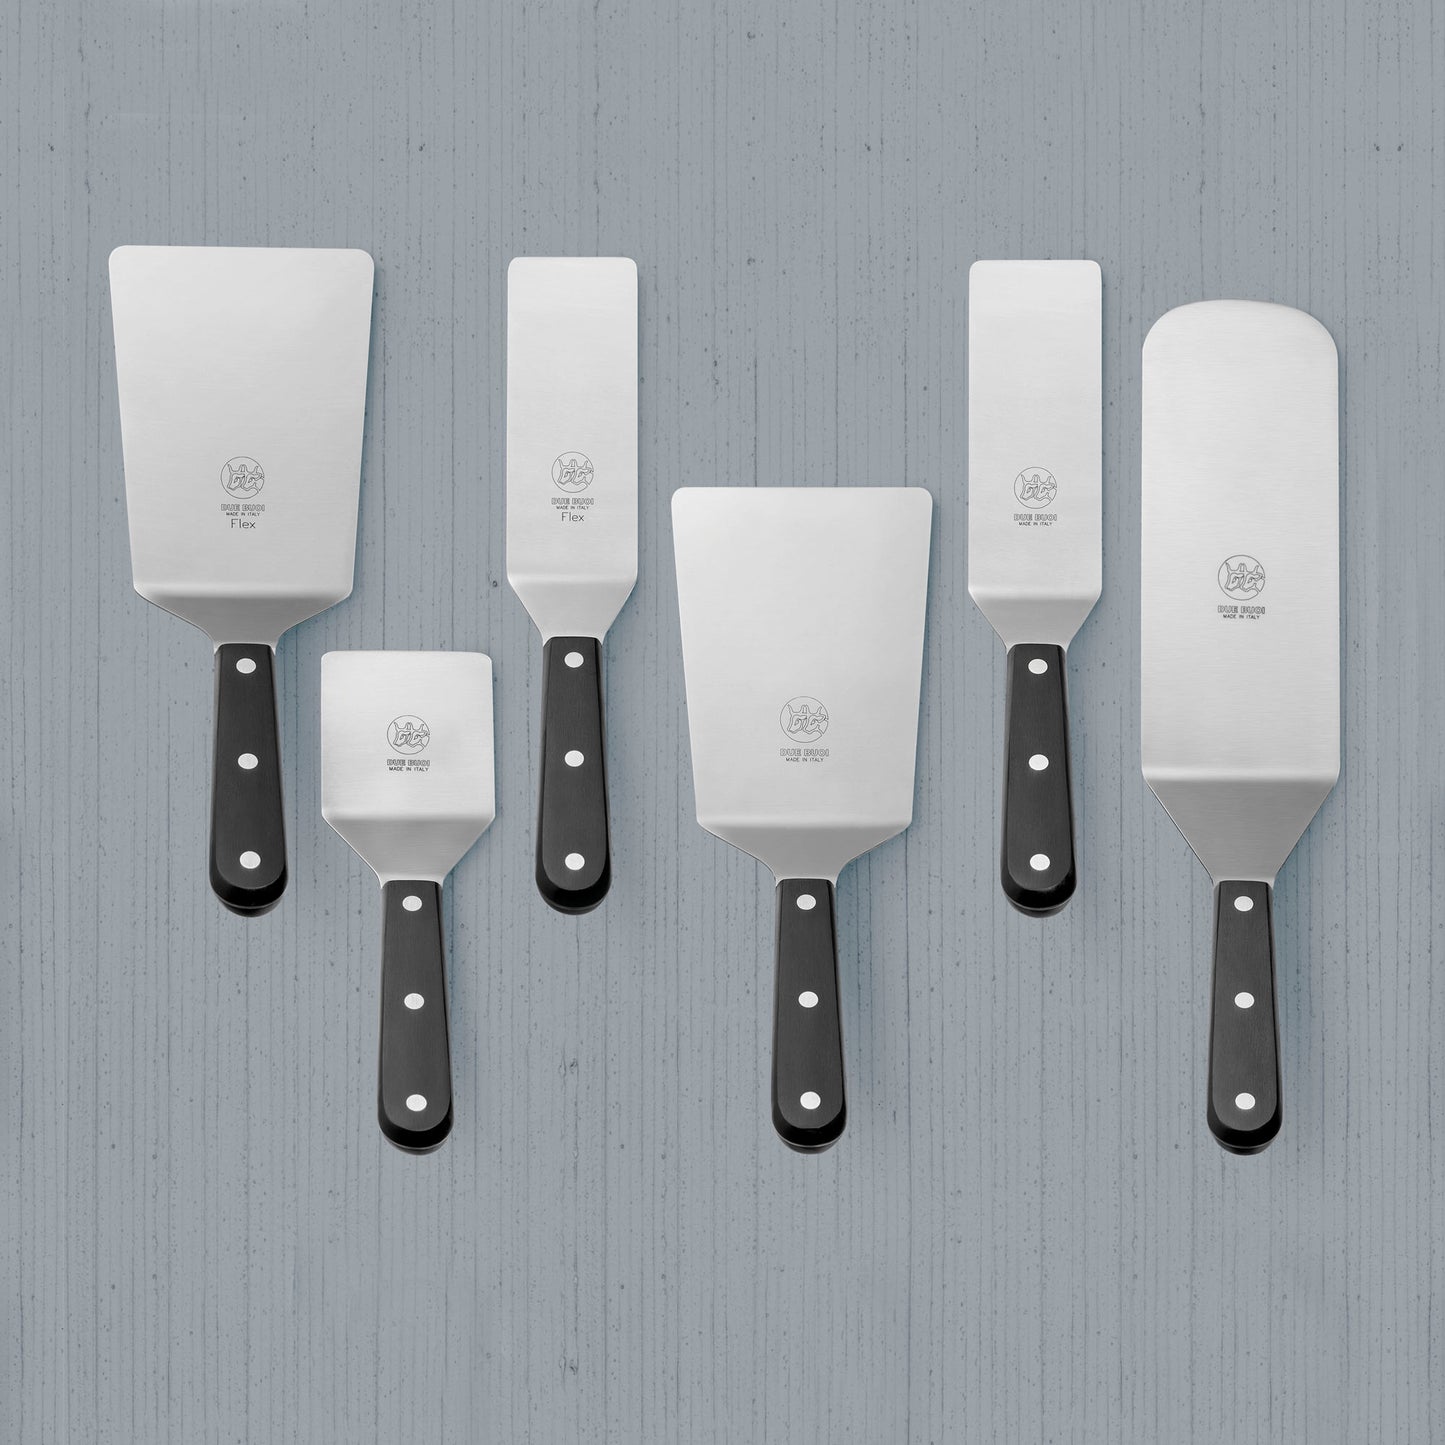 DUE BUOI set Wide Spatula blade dimension 4 x 61/3 and Narrow blade  dimension 2 x 6 1/3. Full Ta…See more DUE BUOI set Wide Spatula blade